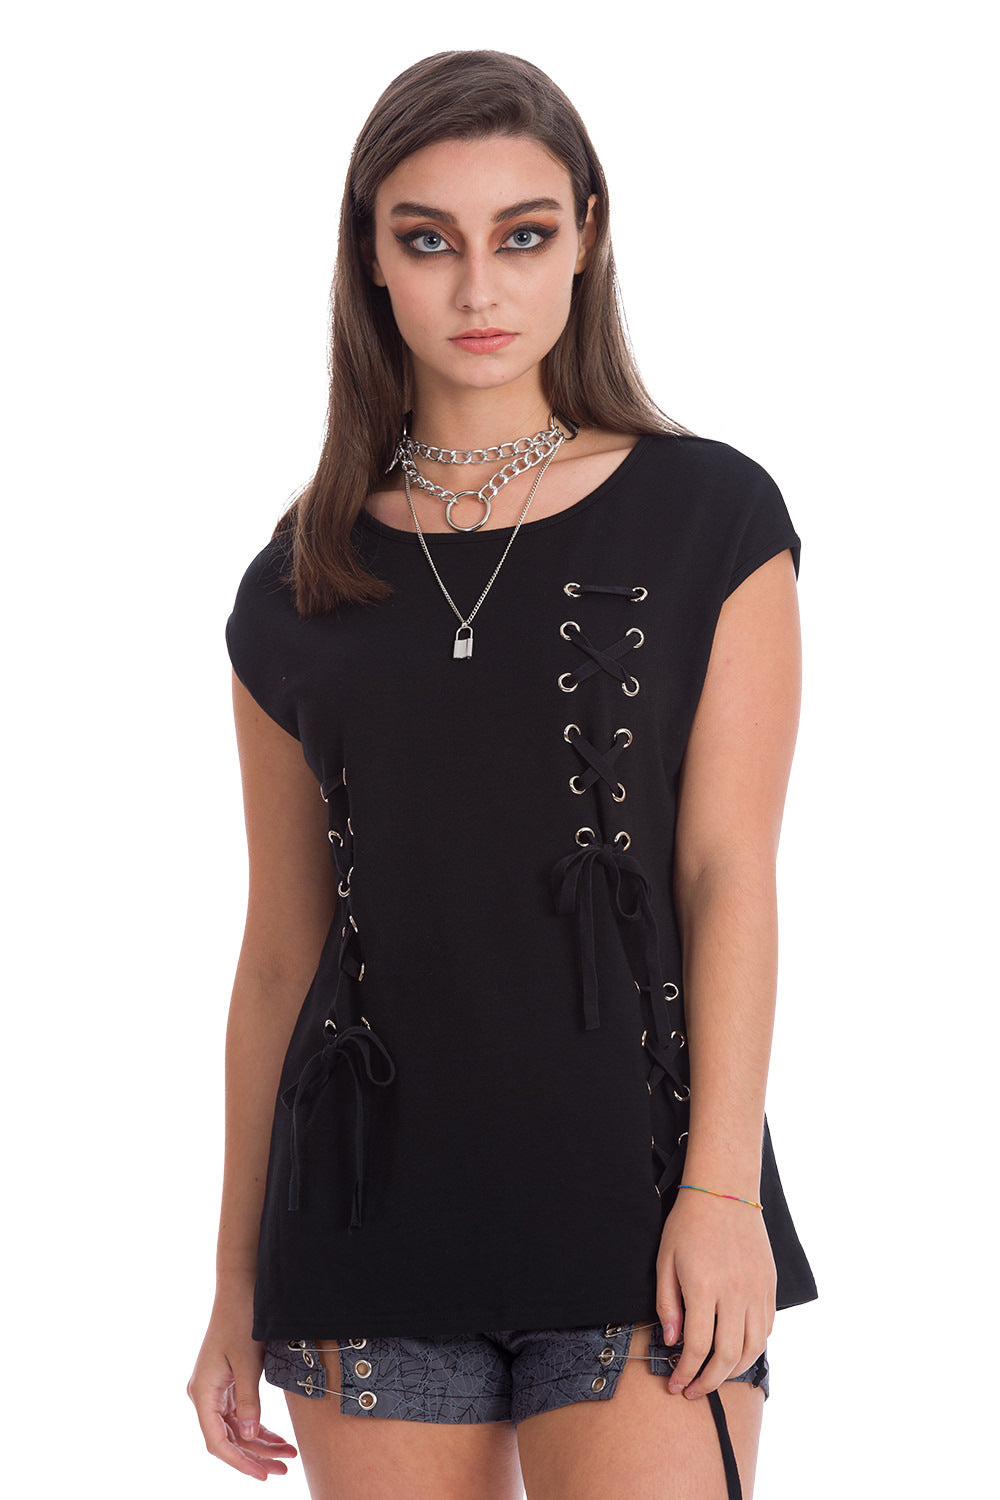 Model wearing long line black t-shirt with corset details in short sleeve